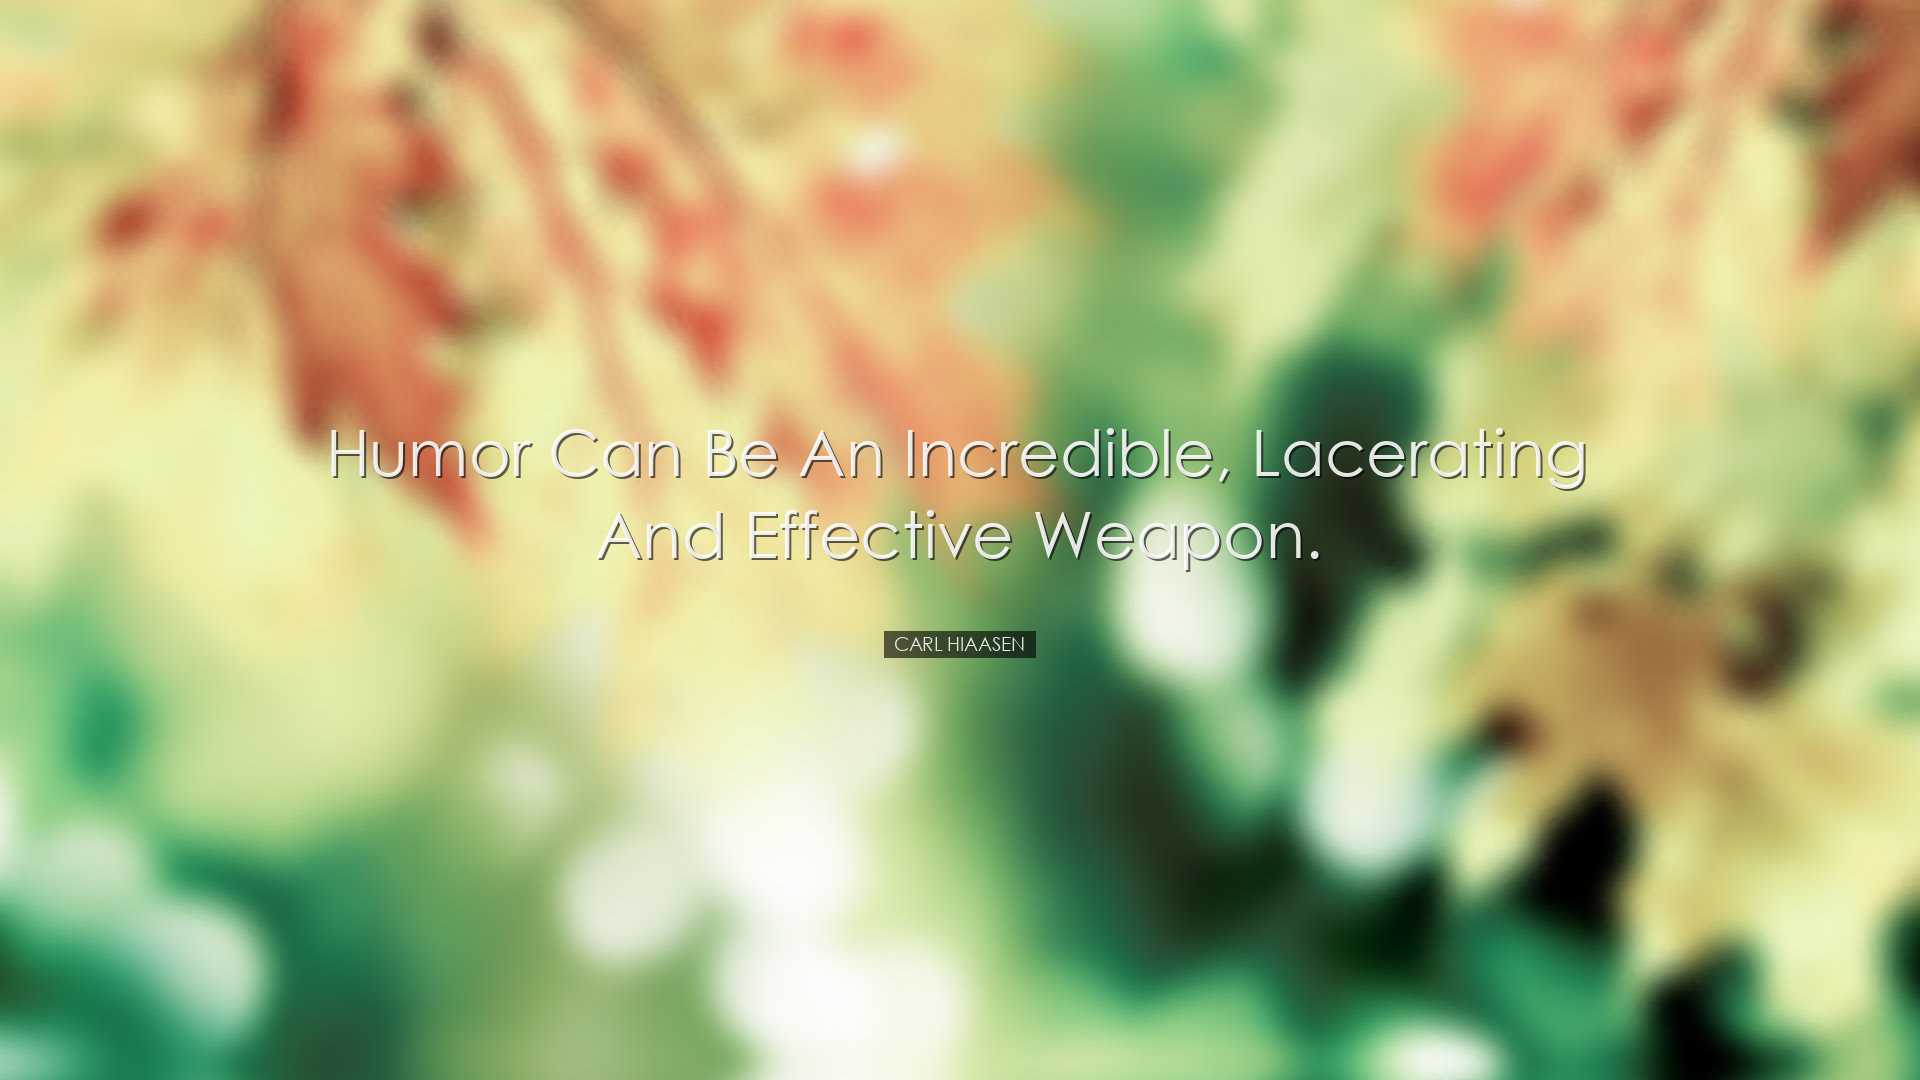 Humor can be an incredible, lacerating and effective weapon. - Car